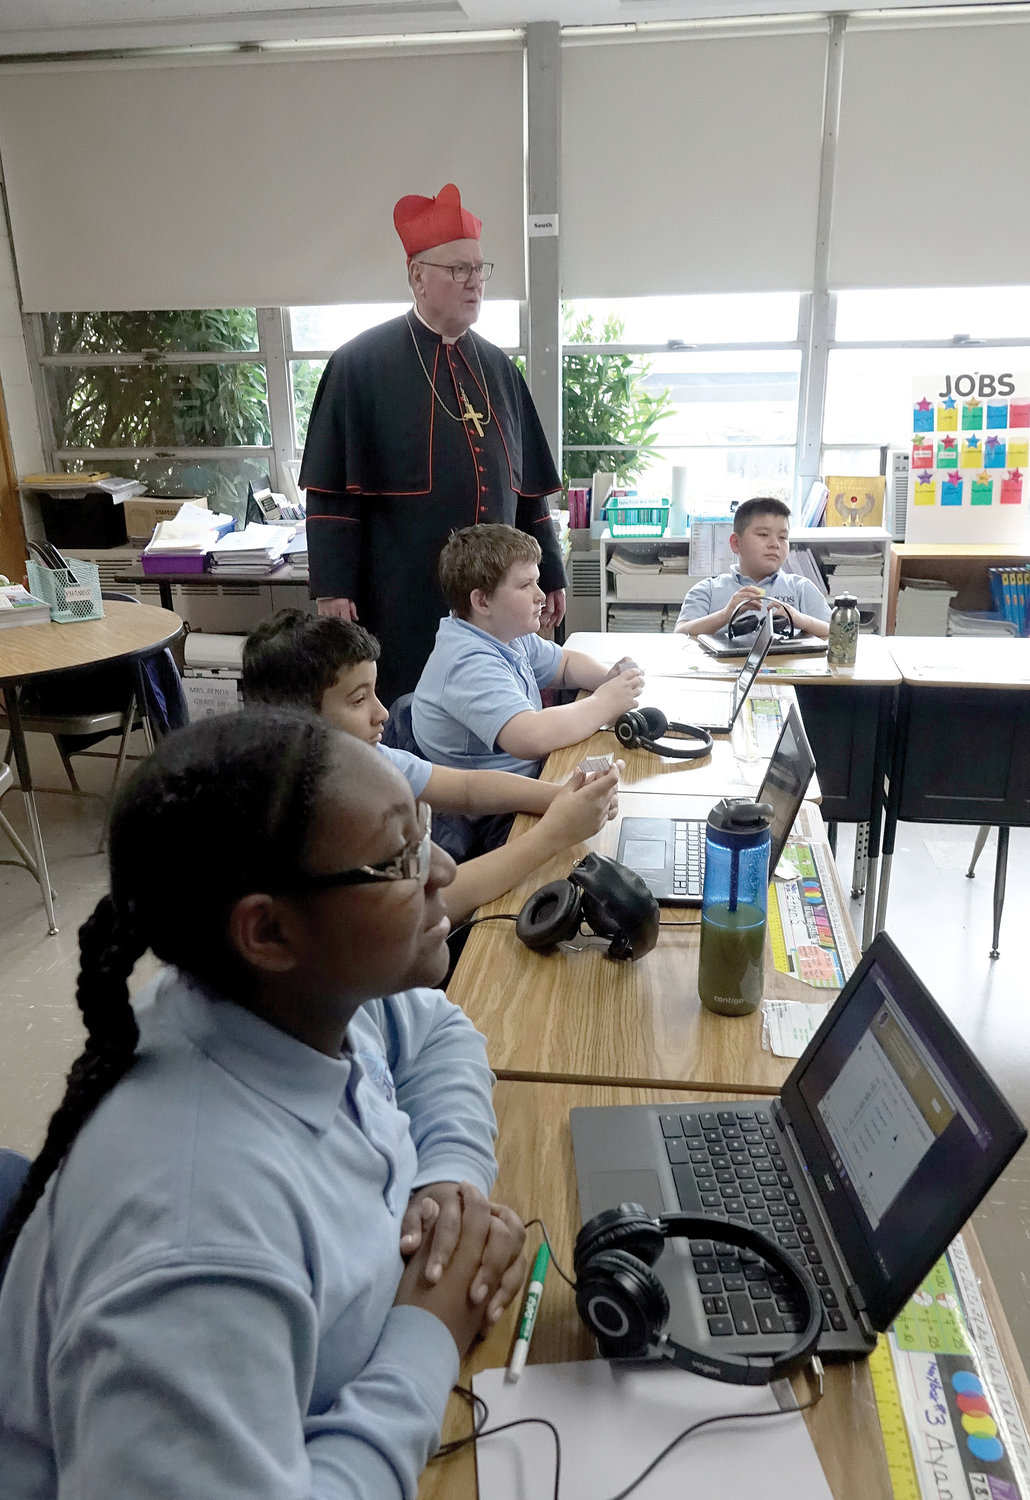 Cardinal Dolan tours the computer class at the John Cardinal O’Connor School in Irvington Jan. 27, the second day of National Catholic Schools Week.